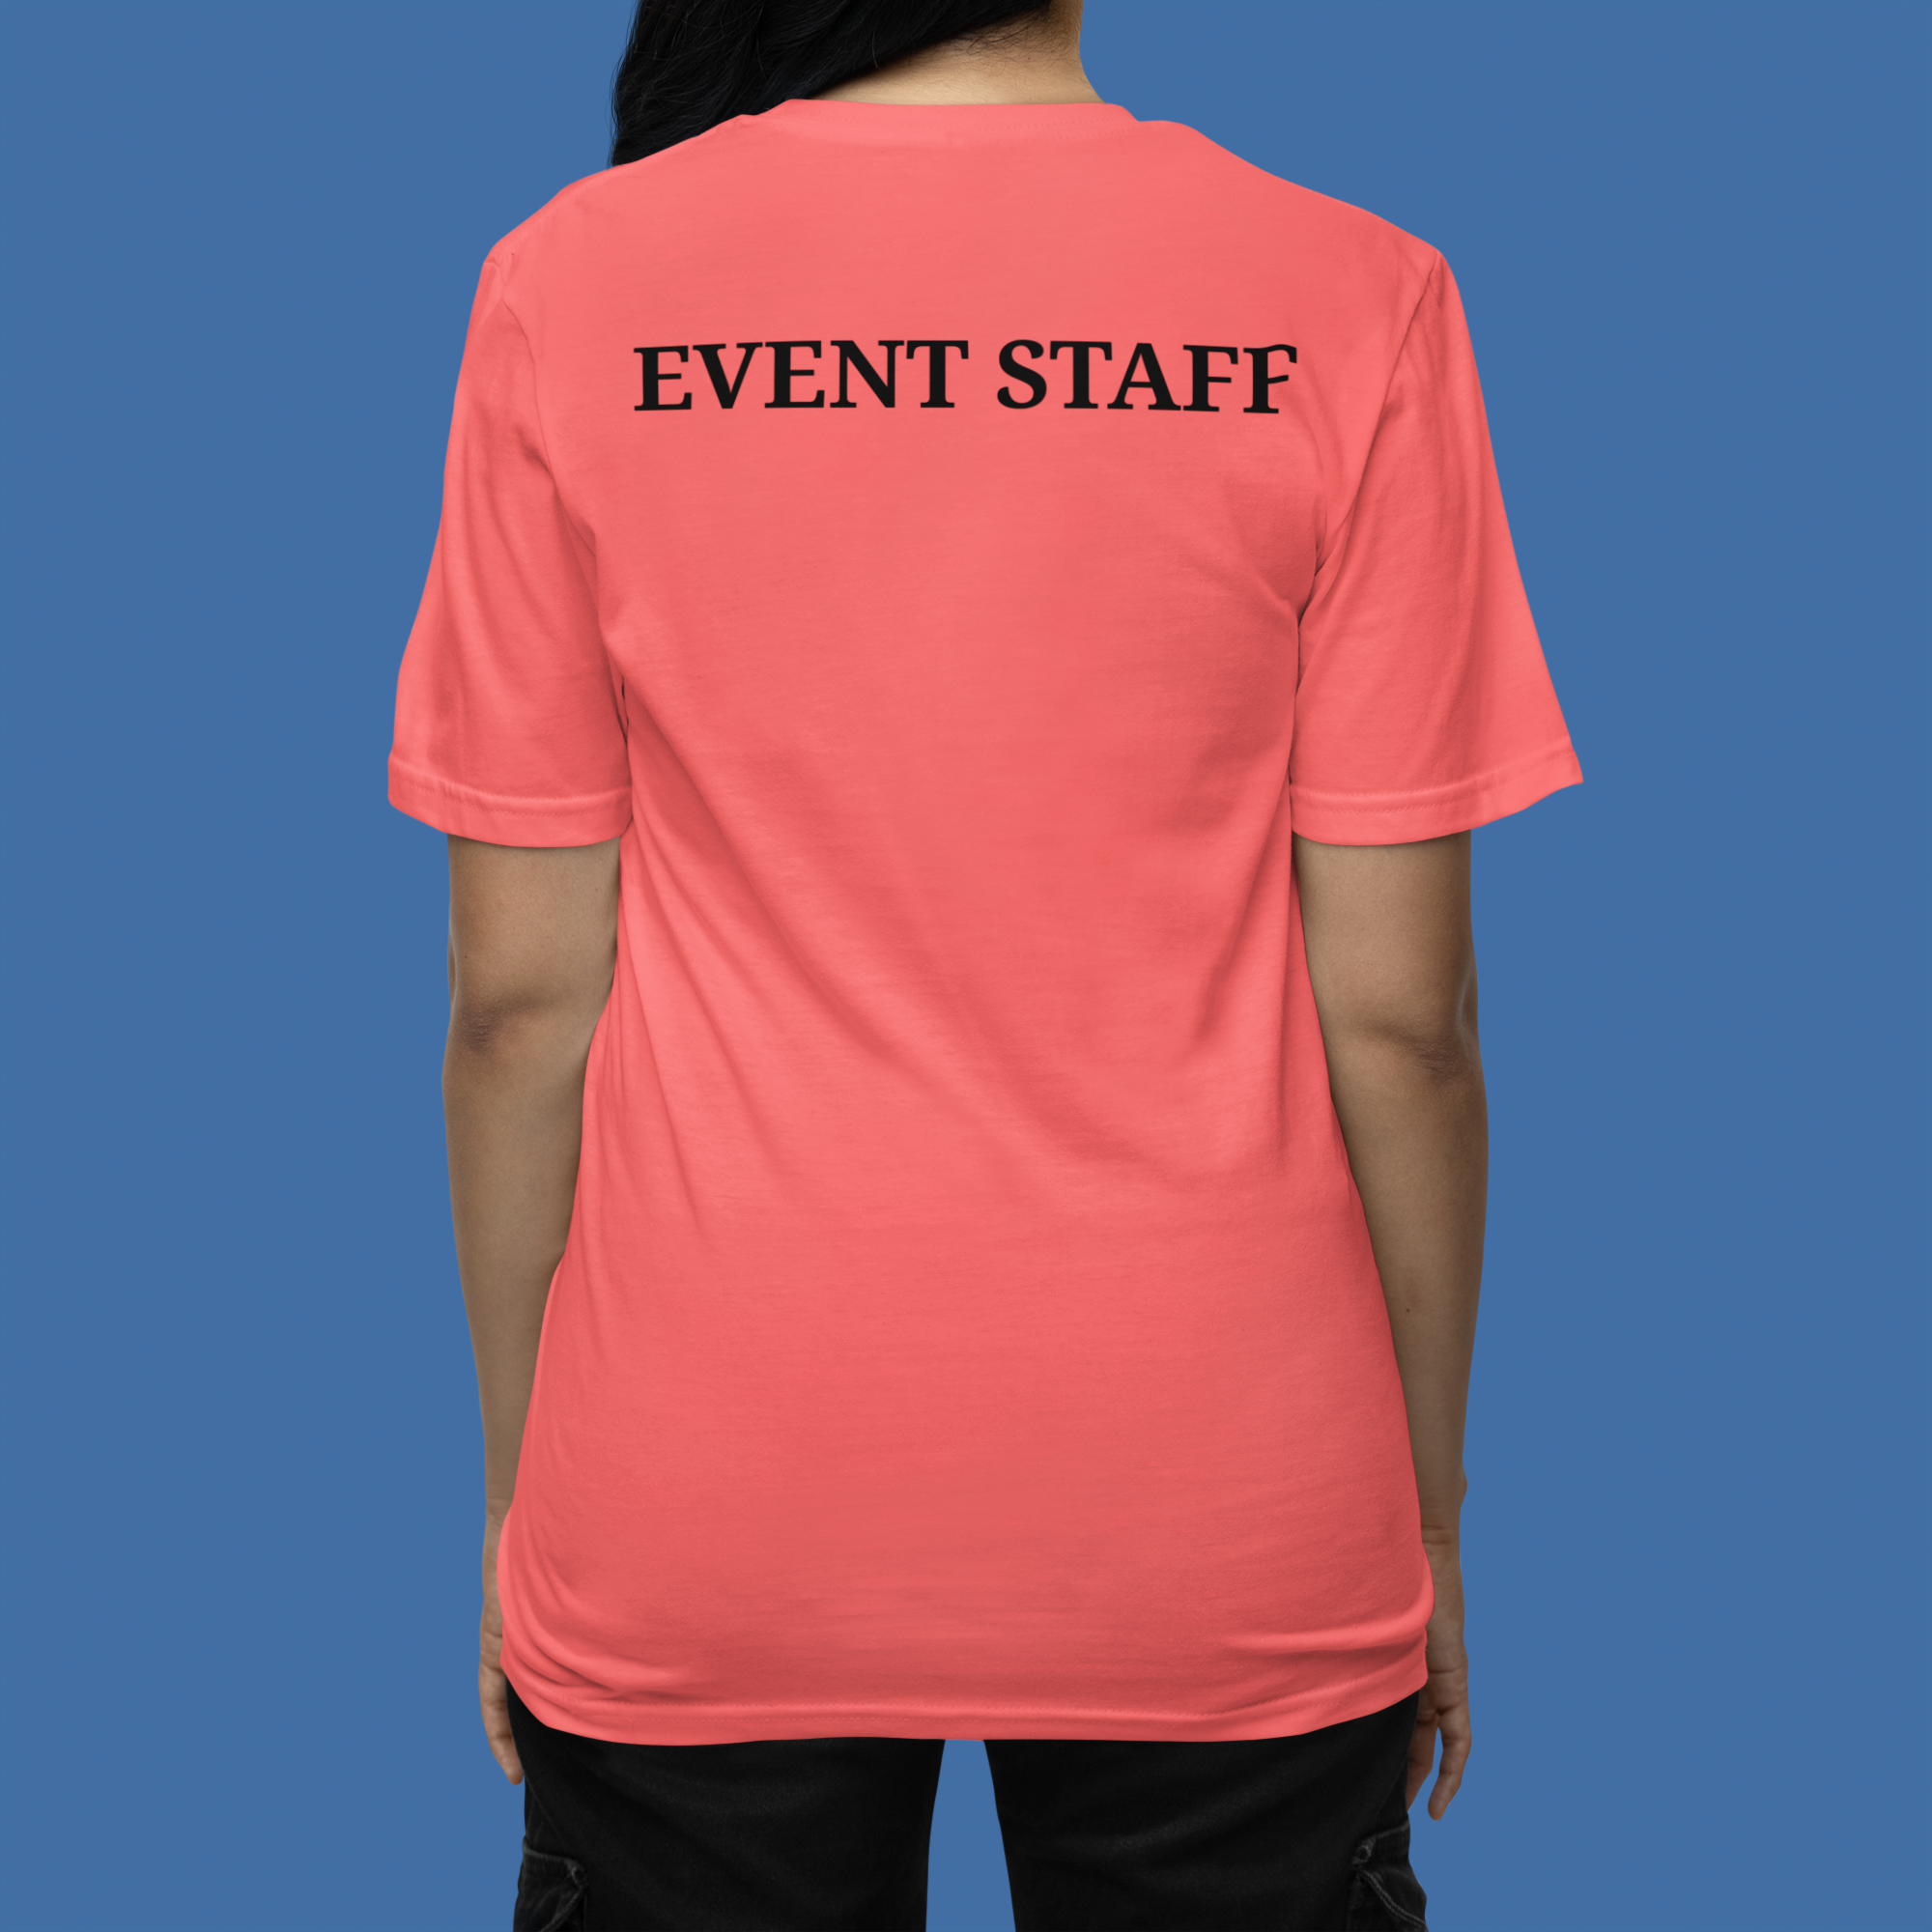 KW Crafted Solutions custom event staff shirt for organization apparel